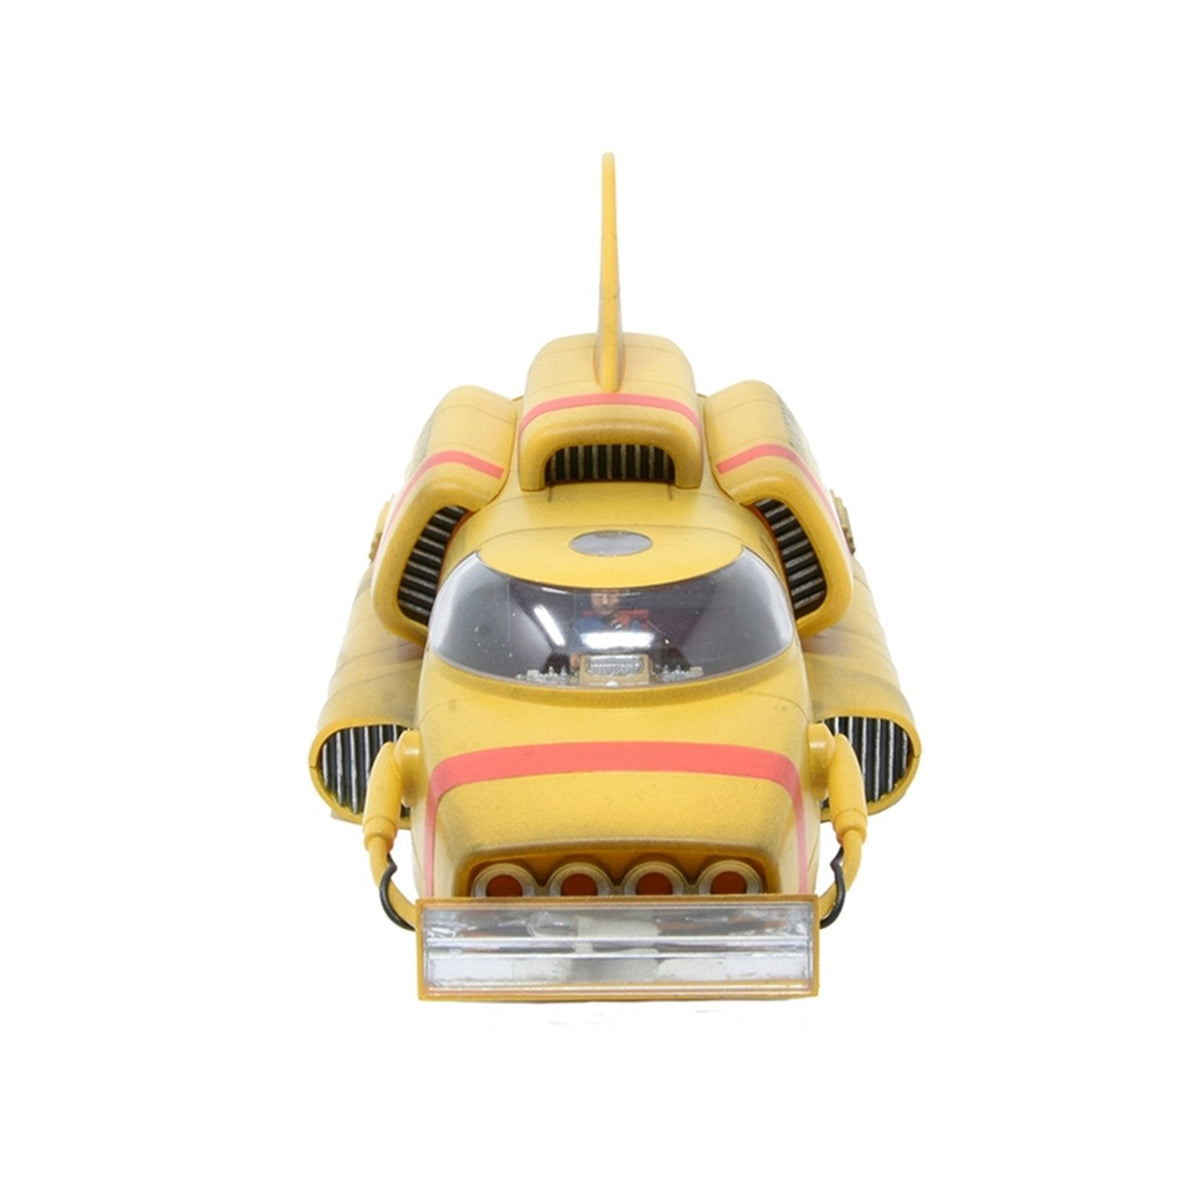 1:48 Thunderbird 4 Model Kit - The Gerry Anderson Store